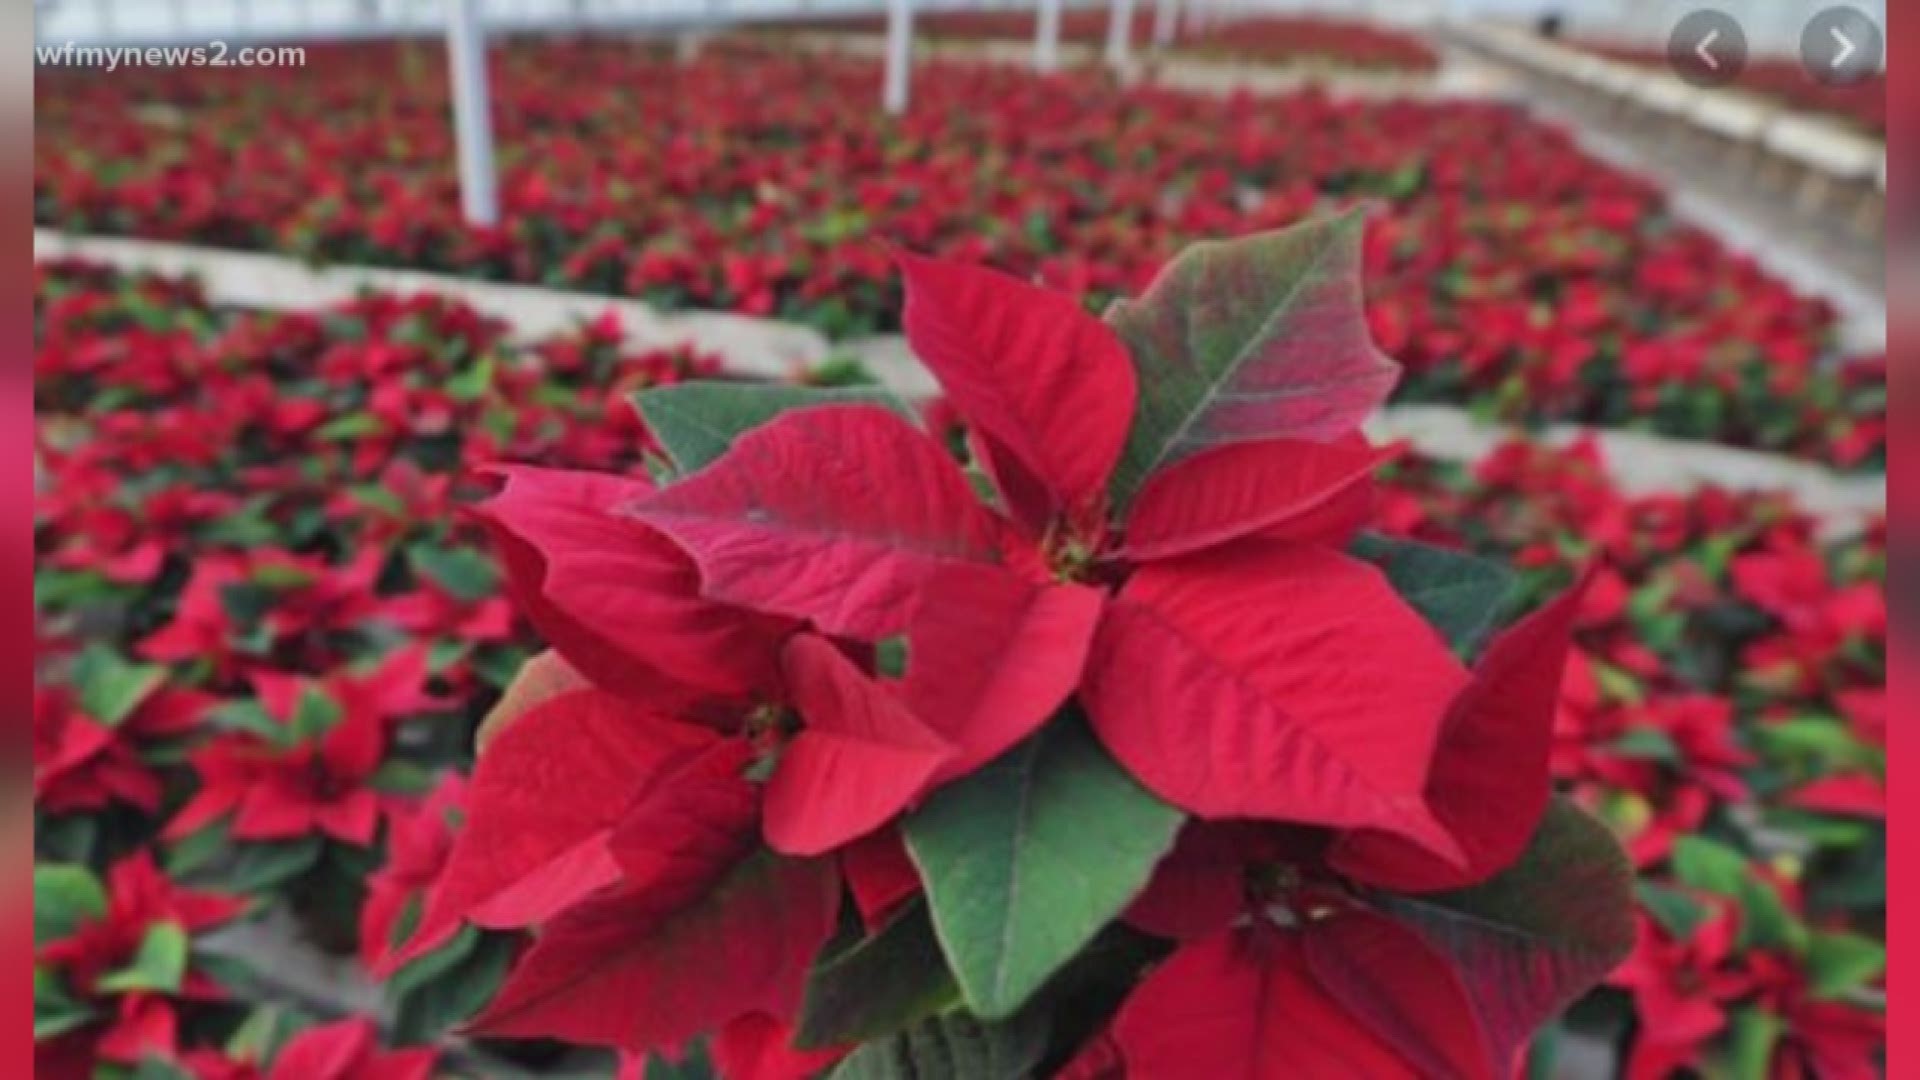 Do pet parents really need to purge the poinsettias forever? Not necessarily.